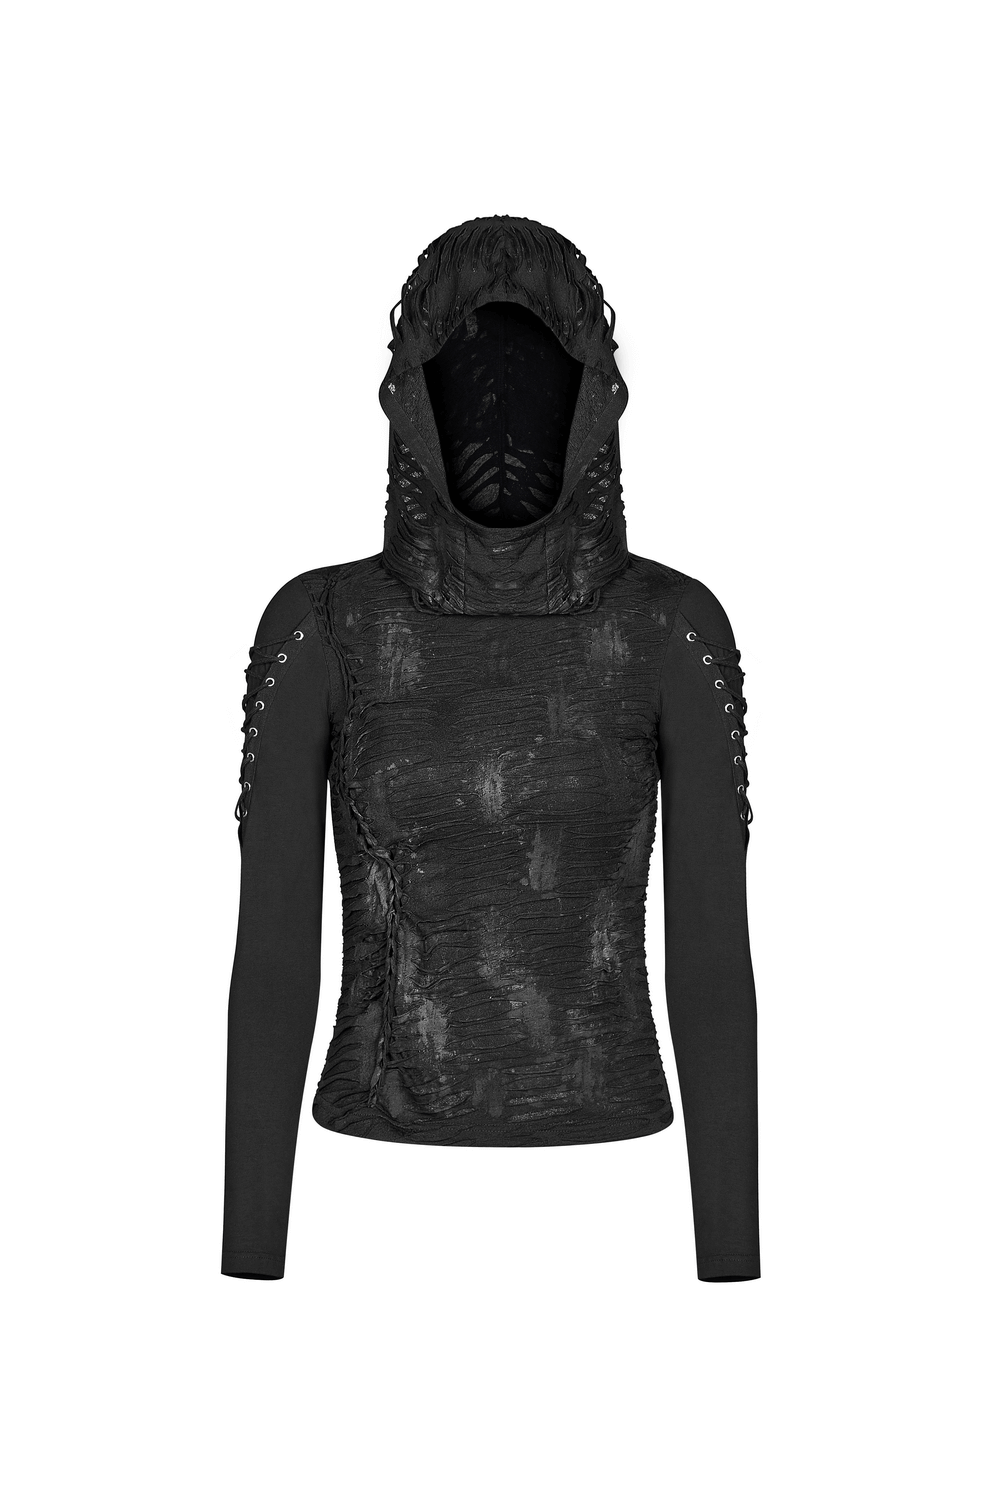 Edgy Women's Black Lace Up Detail Hooded Sweatshirt